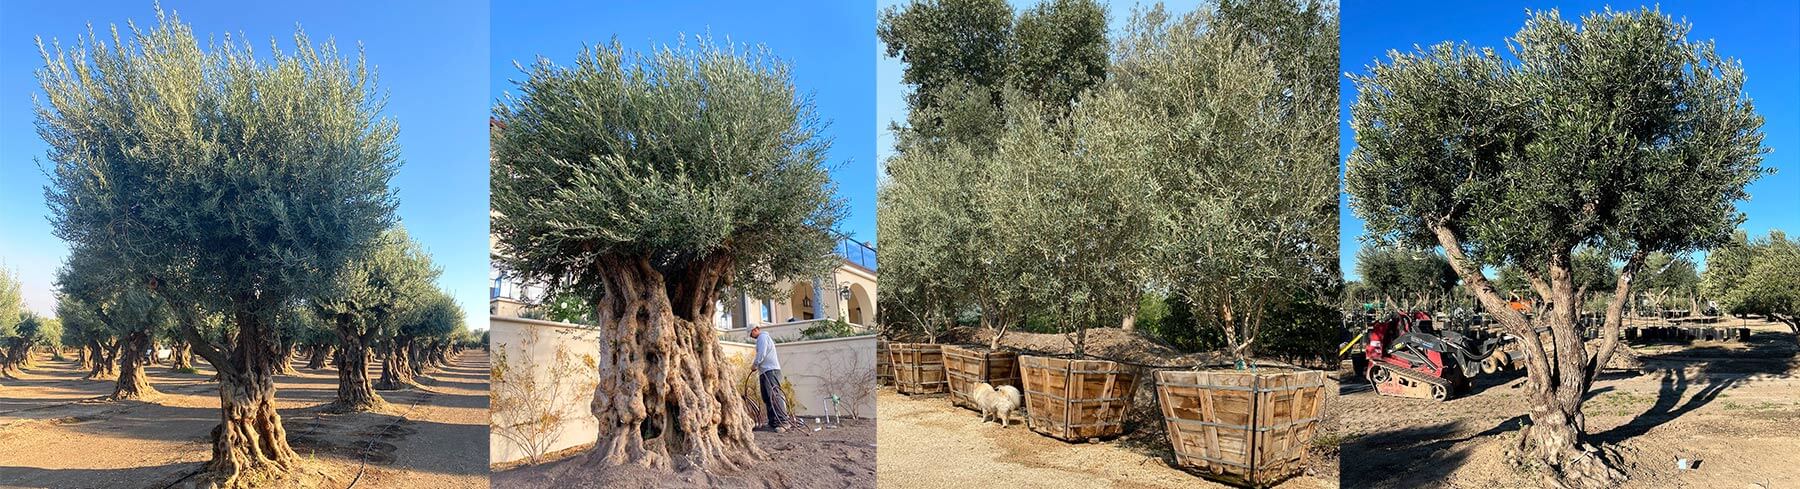 Fruitless Olive Trees for sale on a farm in Sonoma